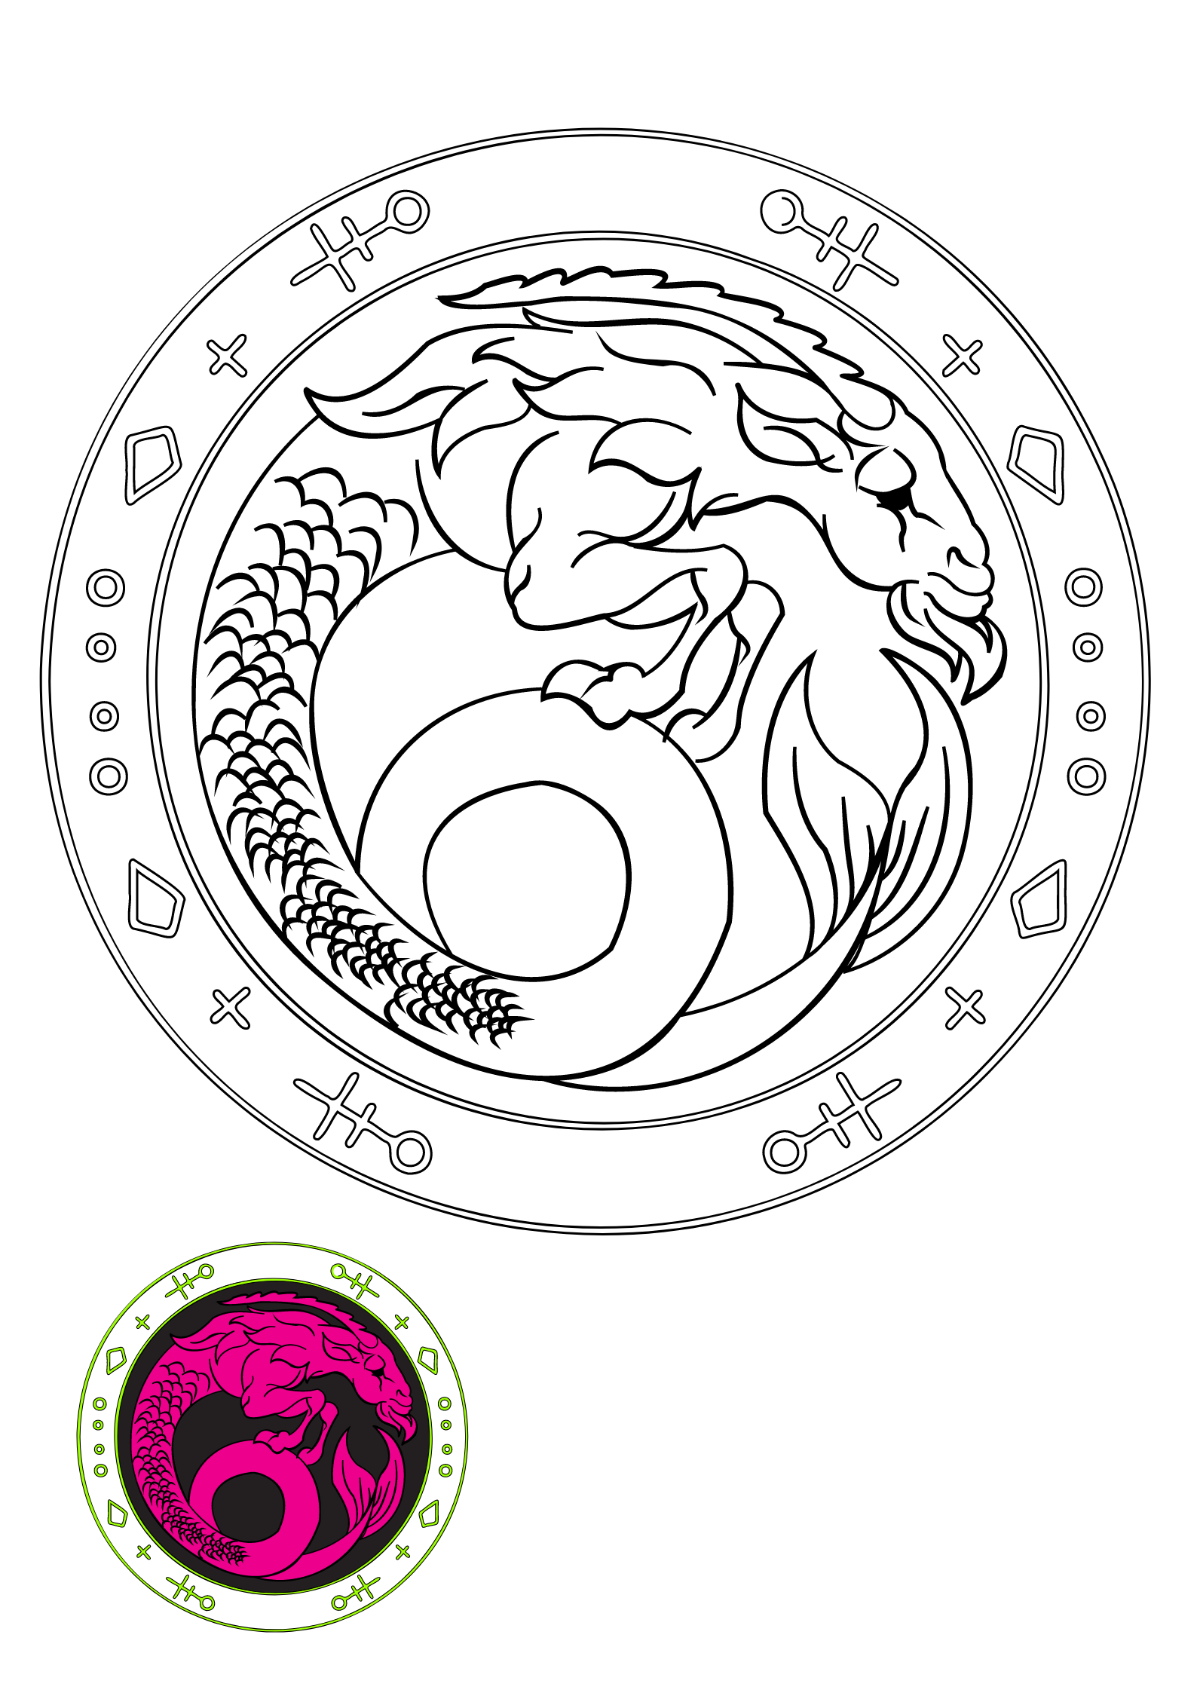 Neon Capricorn coloring page Template